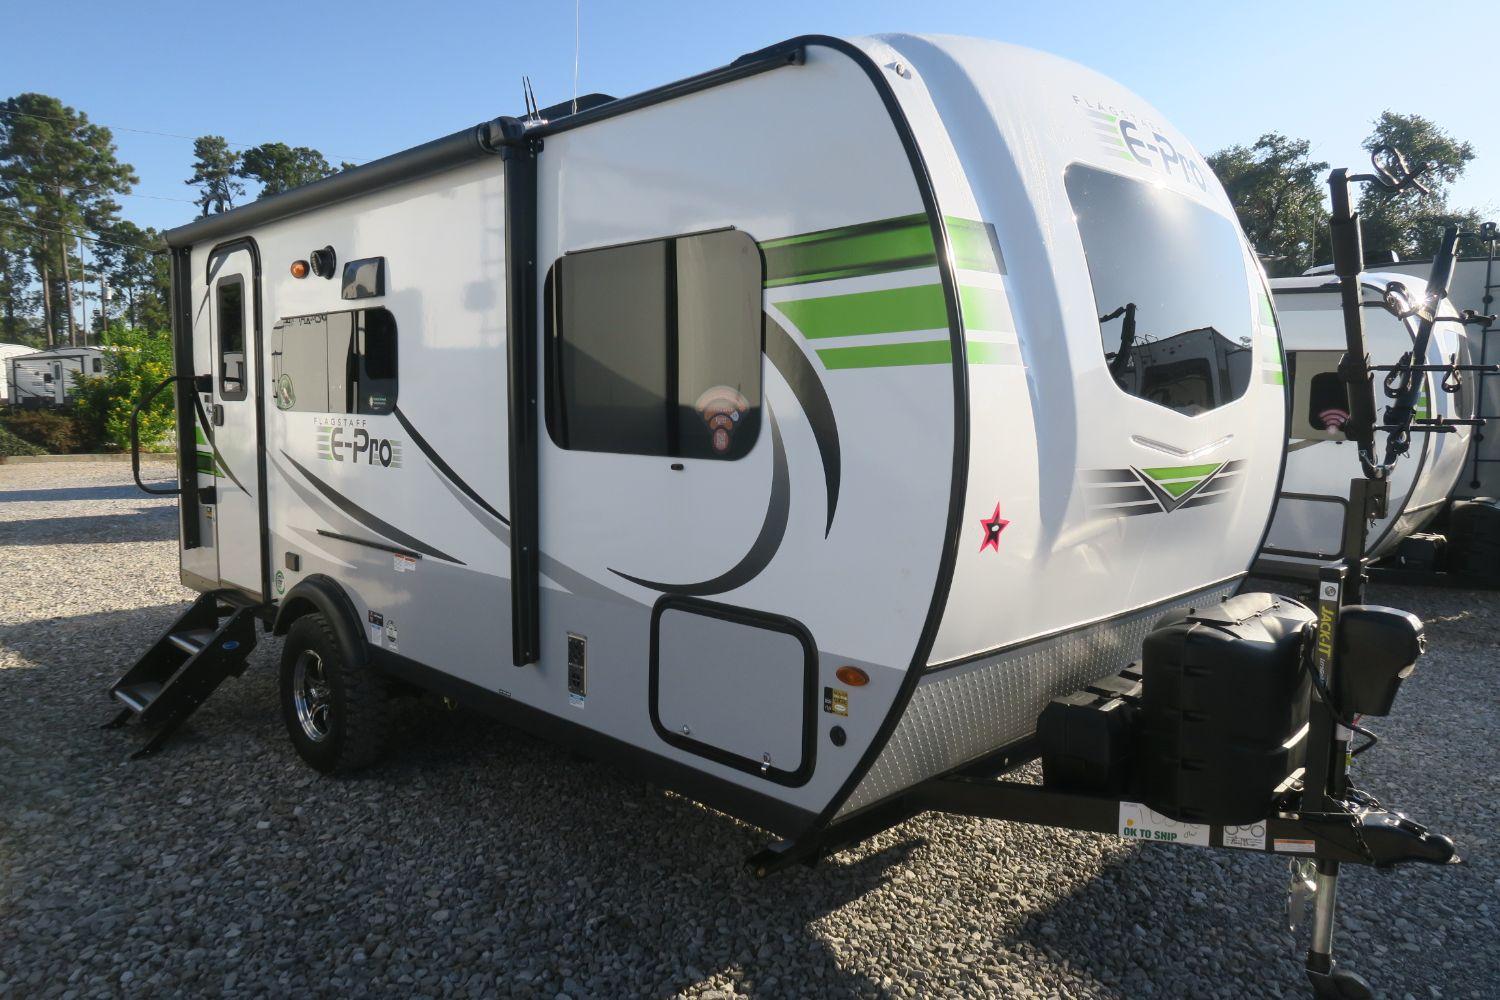 NEW 2020 FLAGSTAFF E-PRO 19FBS - Overview | Berryland Campers